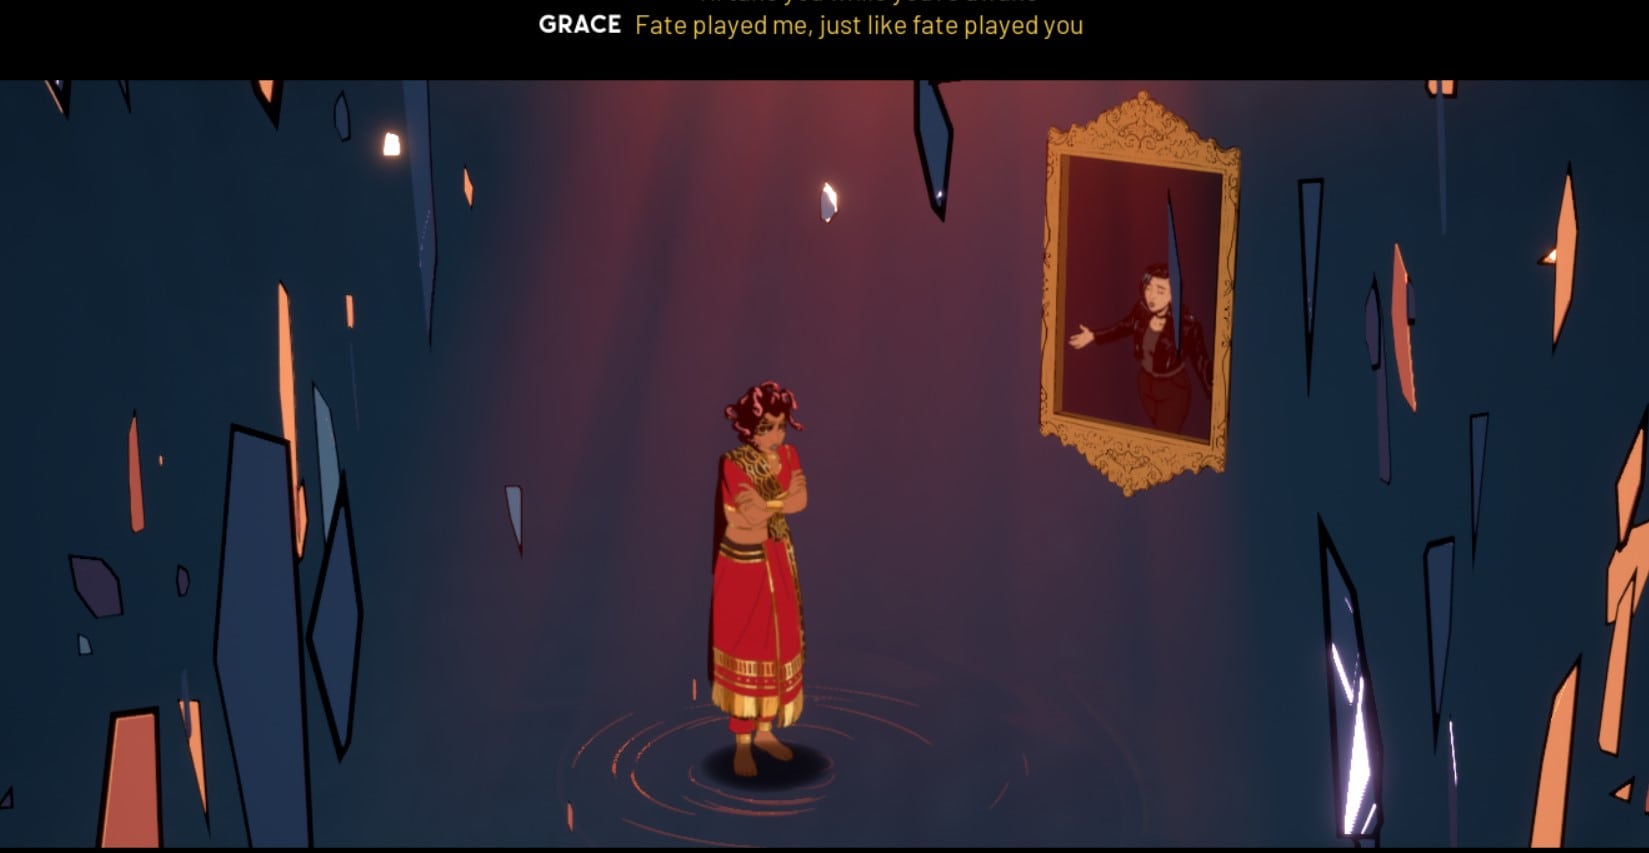 Screenshot of Grace in a mirror singing to Medusa saying "Fate played me just like fate played you." They are in a shattered glass dimension 